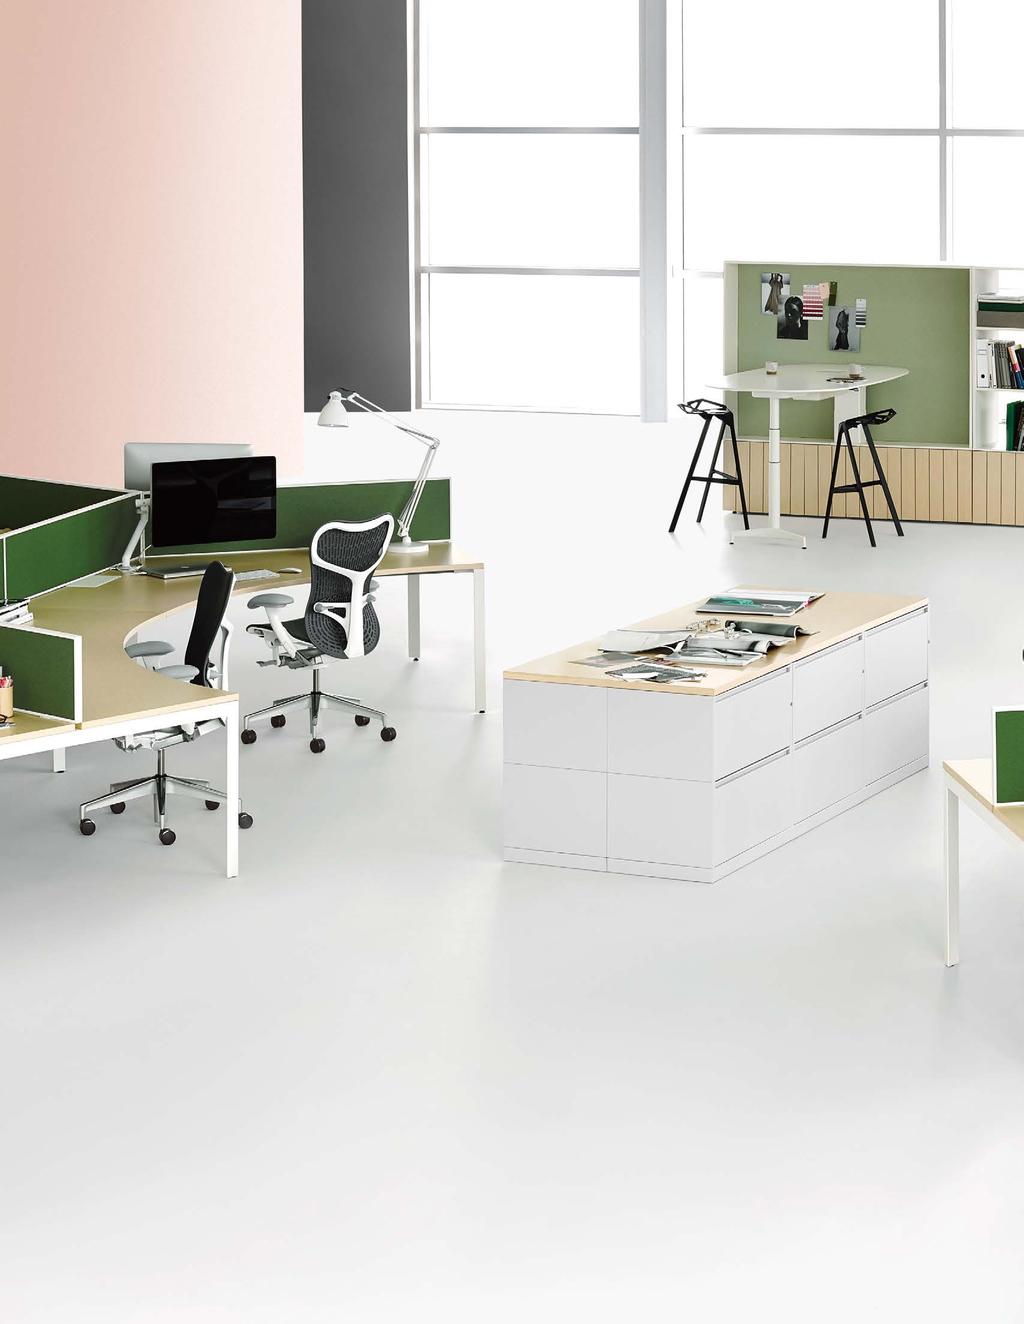 In combination with any of our workspace solutions, Meridian provides storage, boundary, and